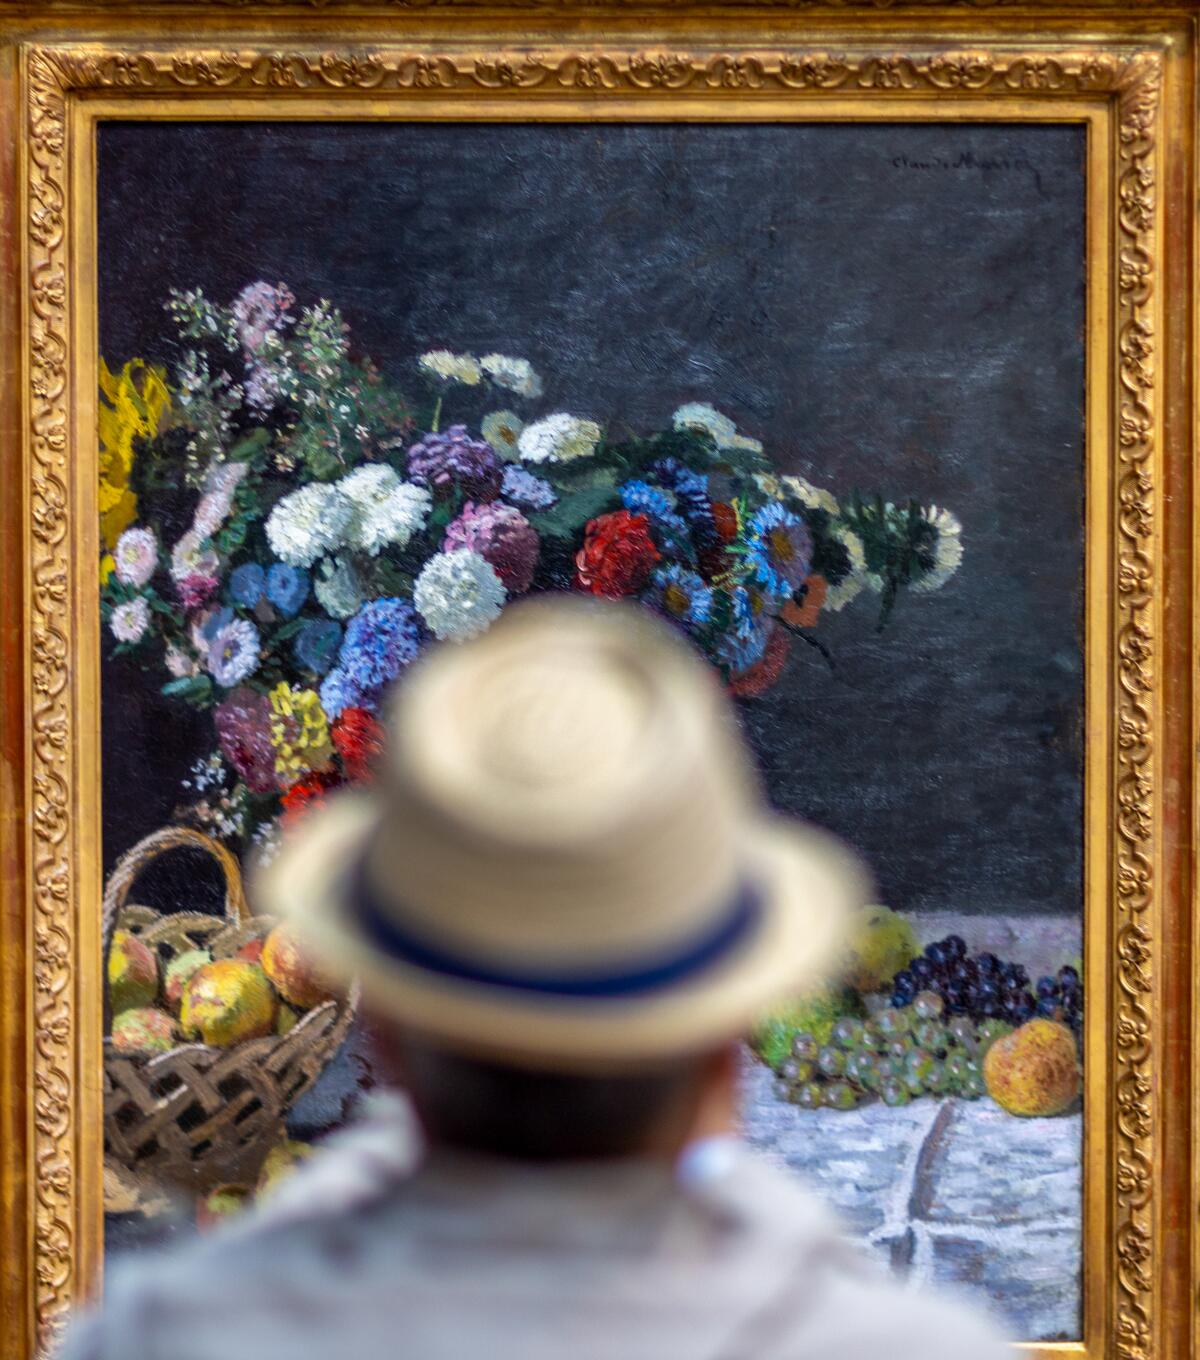 A Getty visitor views Monet's "Still Life With Flowers and Fruit" in the West Pavilion.